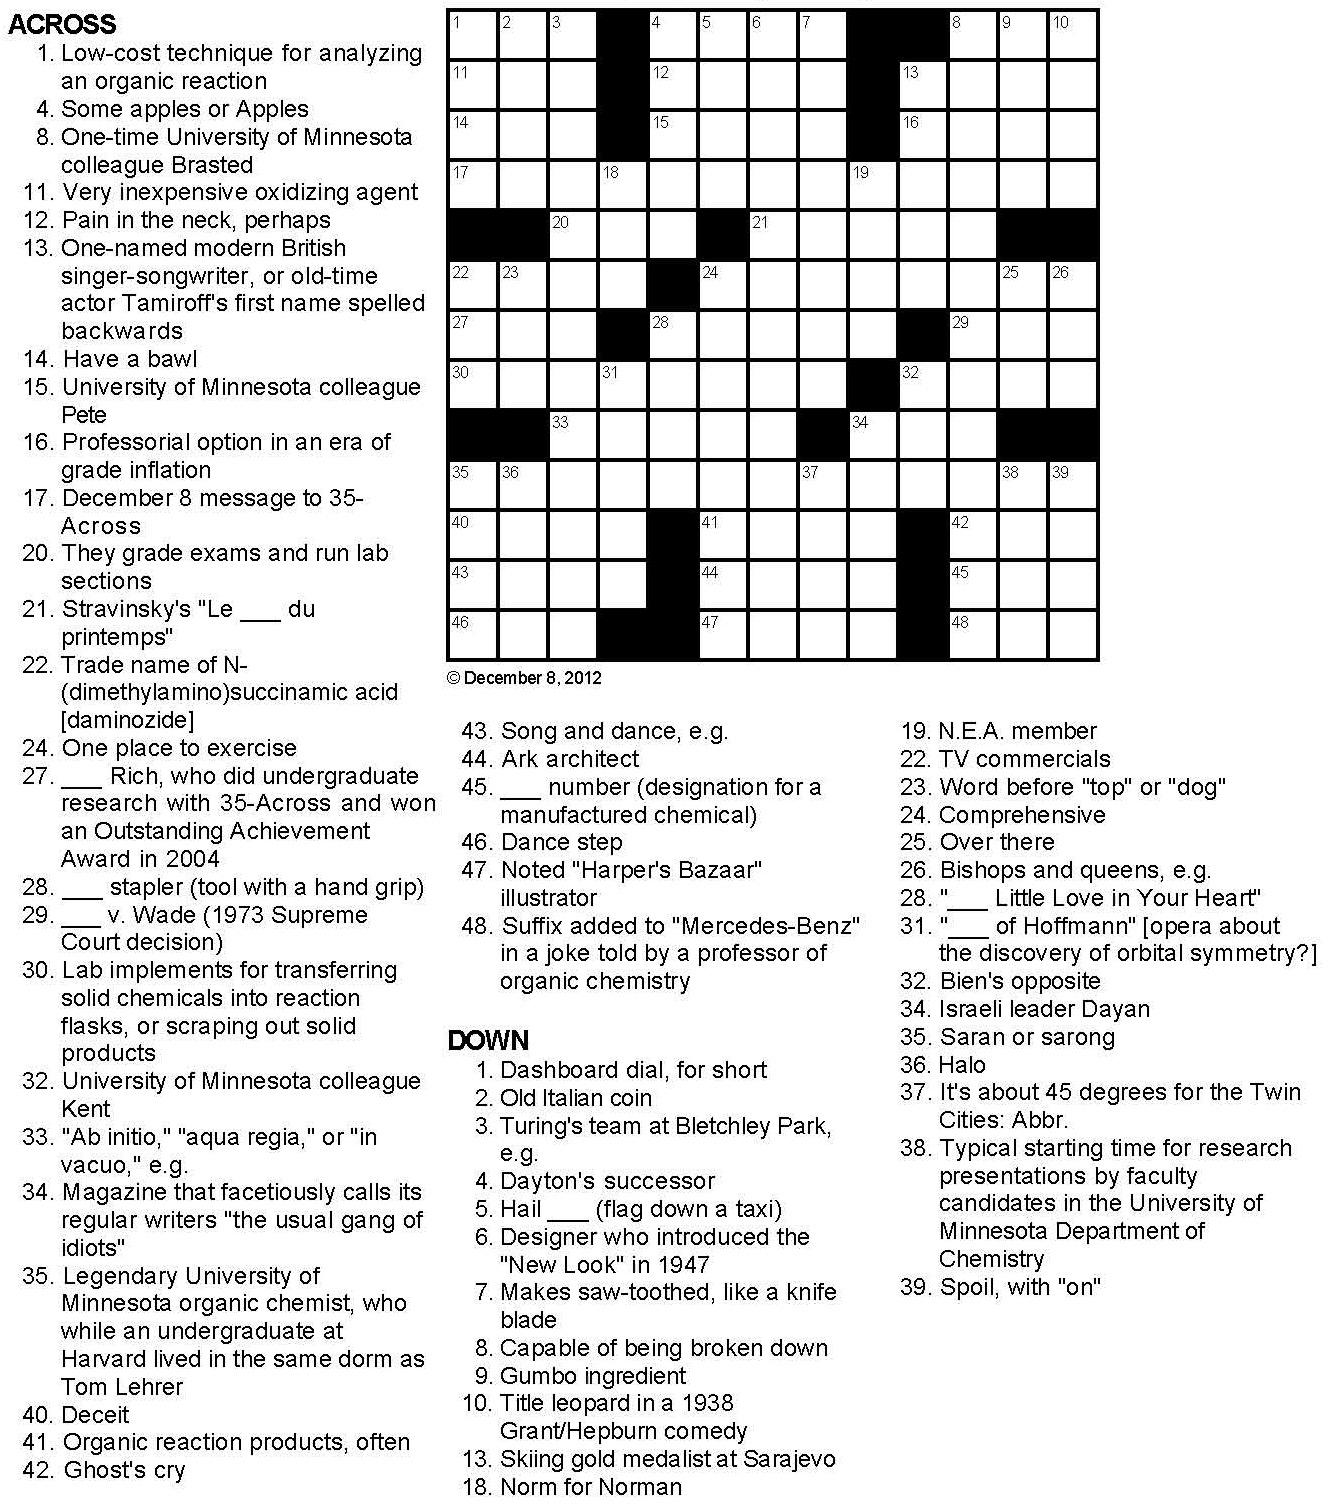 18-educative-chemistry-crossword-puzzles-kittybabylove